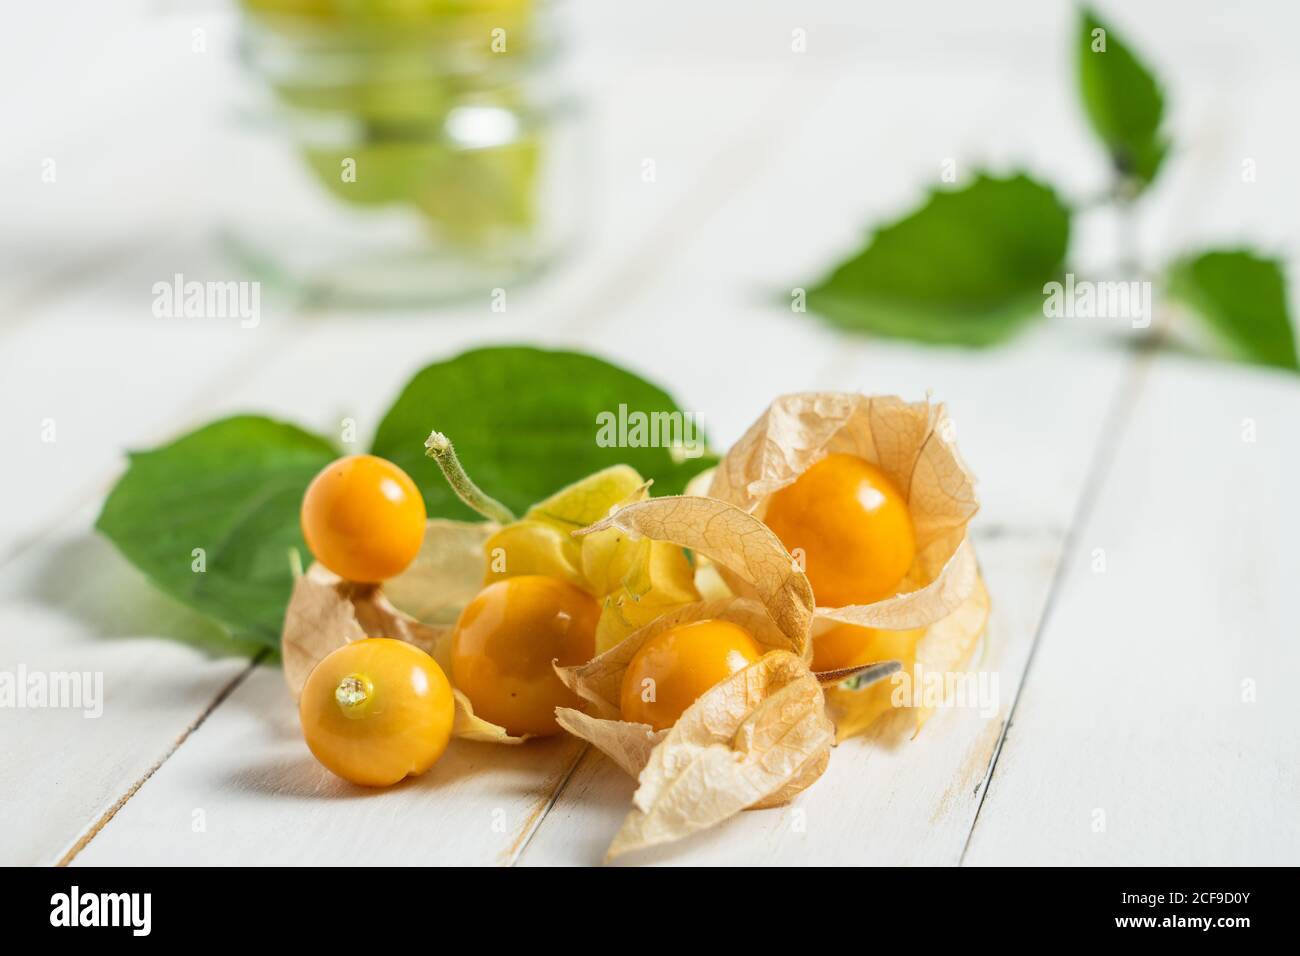 Physalis fruit (Physalis peruviana) also called uchuva, cape gooseberry or gold berries, native of Peru, on a wooden white board with leaves. Stock Photo